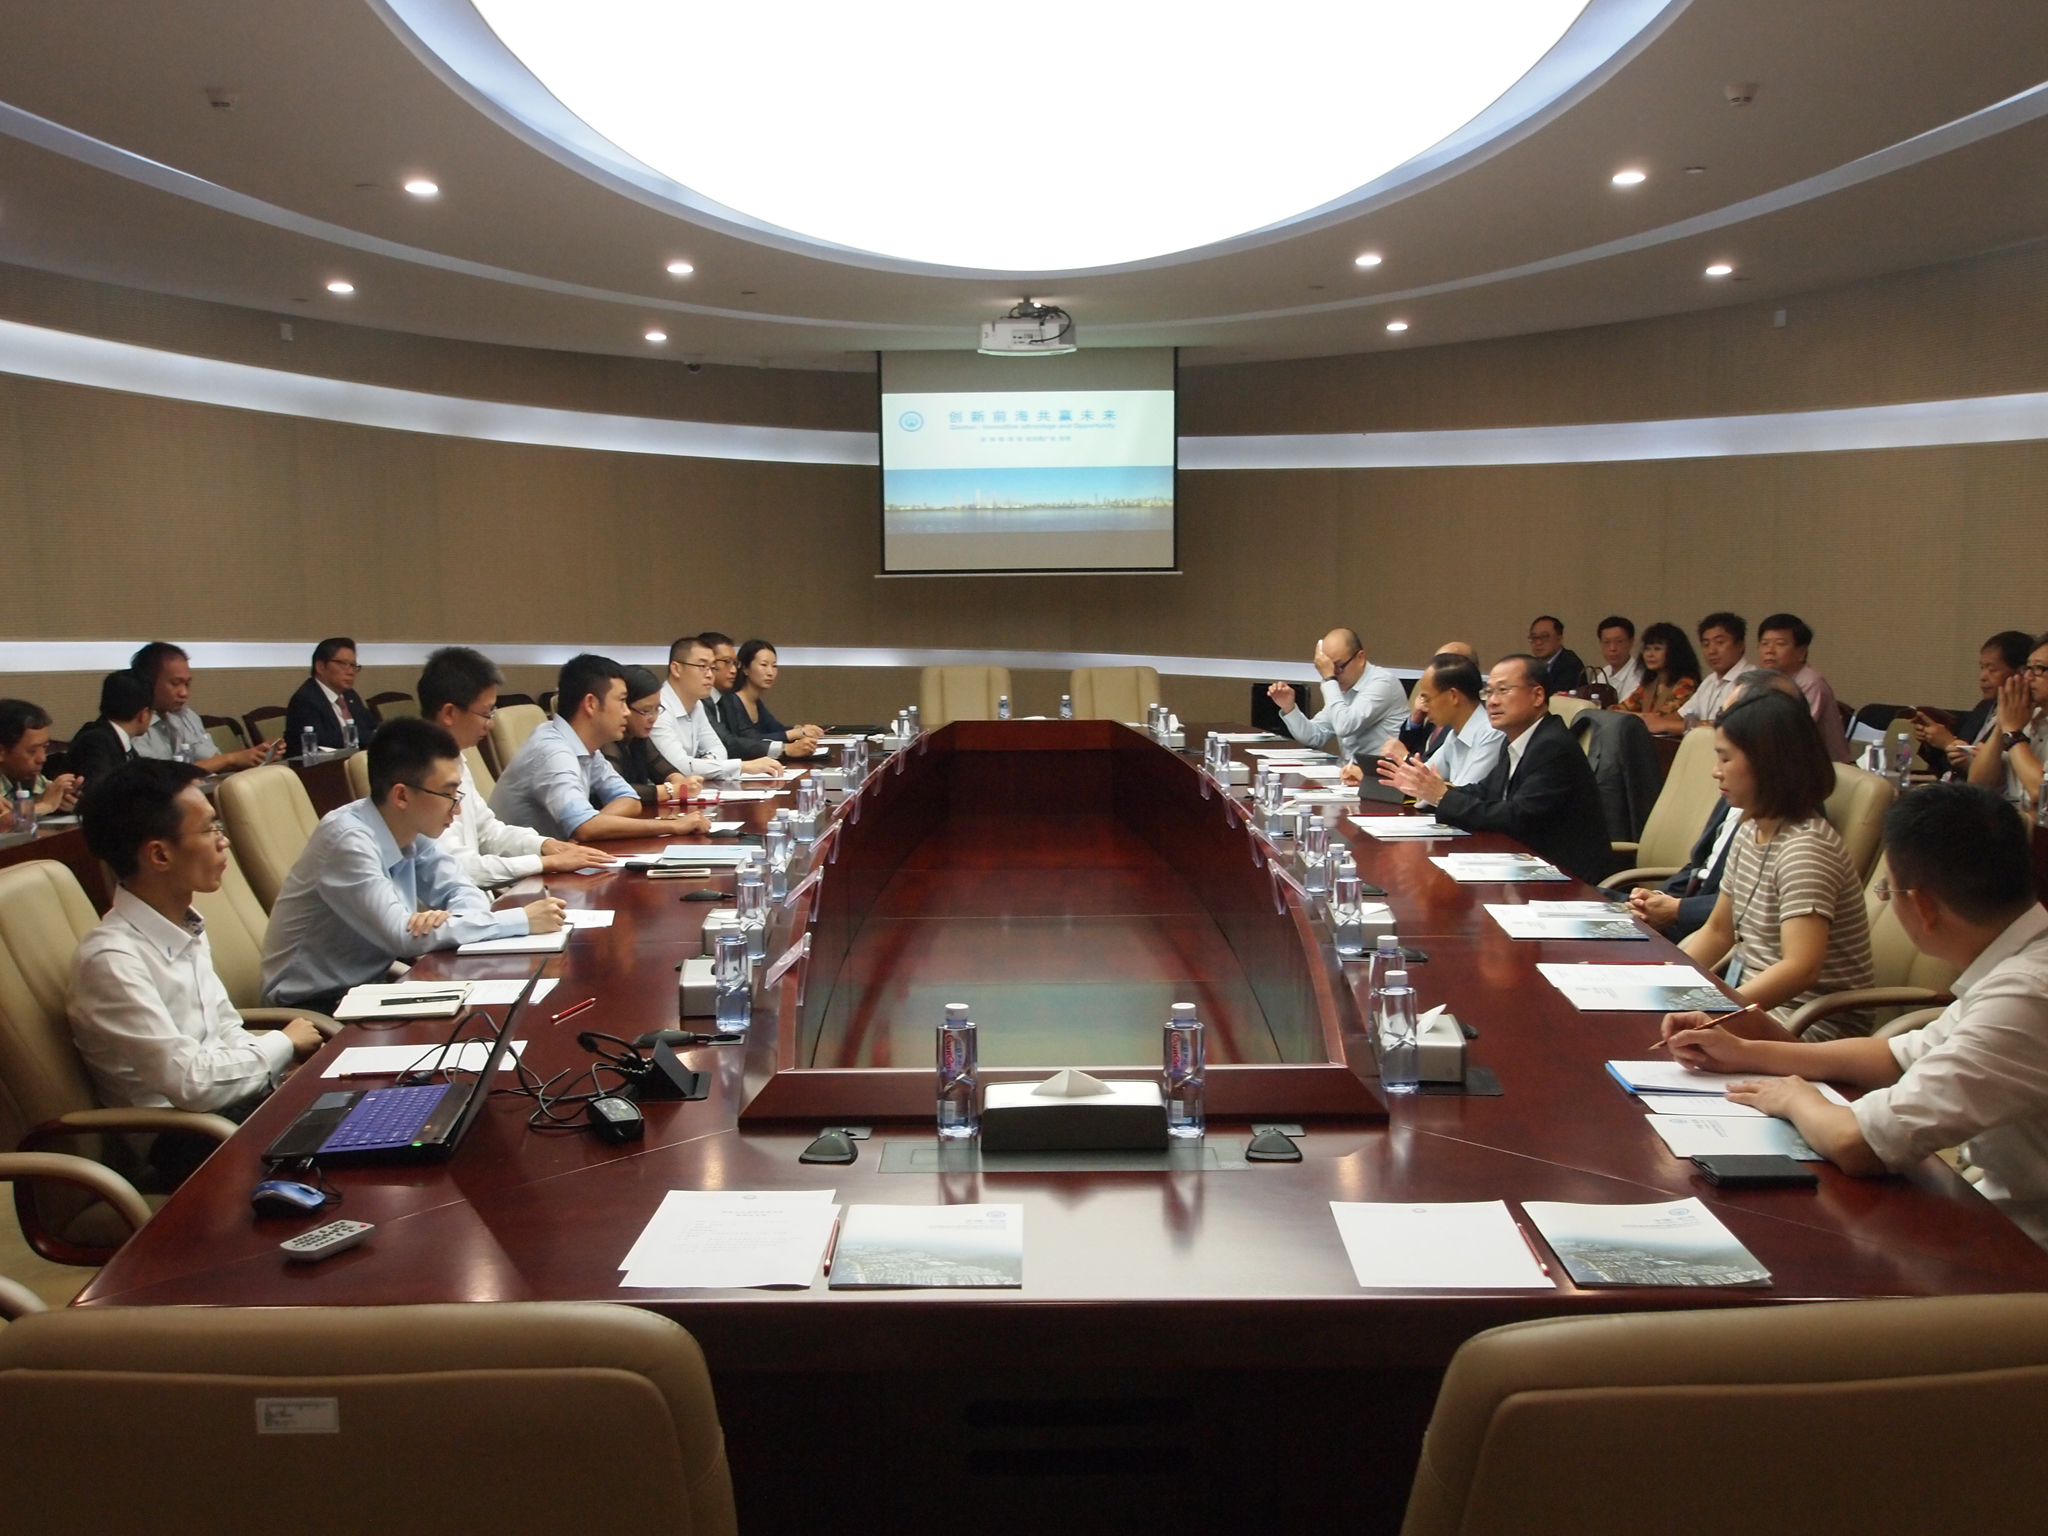 Photo 16 : The Small and Medium Enterprises Committee (SMEC) and the Guangdong Economic and Trade Office (GDETO) co-organised a Delegation visit to the "Qianhai Shenzhen-Hong Kong Modern Service Industry Cooperation Zone", and "Shekou Area of Shenzhen of the China (Guangdong) Pilot Free Trade Zone" on 7 September 2015.  The Delegation was led by the SMEC Chairman Dr Johnathan CHOI, Director-General of Trade and Industry, and Director of GDETO.  There were over 50 participants coming from the SMEC, major Hong Kong Chambers of Commerce and SME associations.  The Delegation was received by the Qianhai Authority and the authority of the "Shekou Area of Shenzhen of the China (Guangdong) Pilot Free Trade Zone".  It visited the Qianhai Exhibition Hall, Qianhai Enterprise Dream Park and the Shekou Network Valley.  Participants also had an exchange with representatives of the Qianhai Authority to understand the latest development and business opportunities of Qianhai, and experiences of Hong Kong enterprises in developing these businesses in Qianhai.